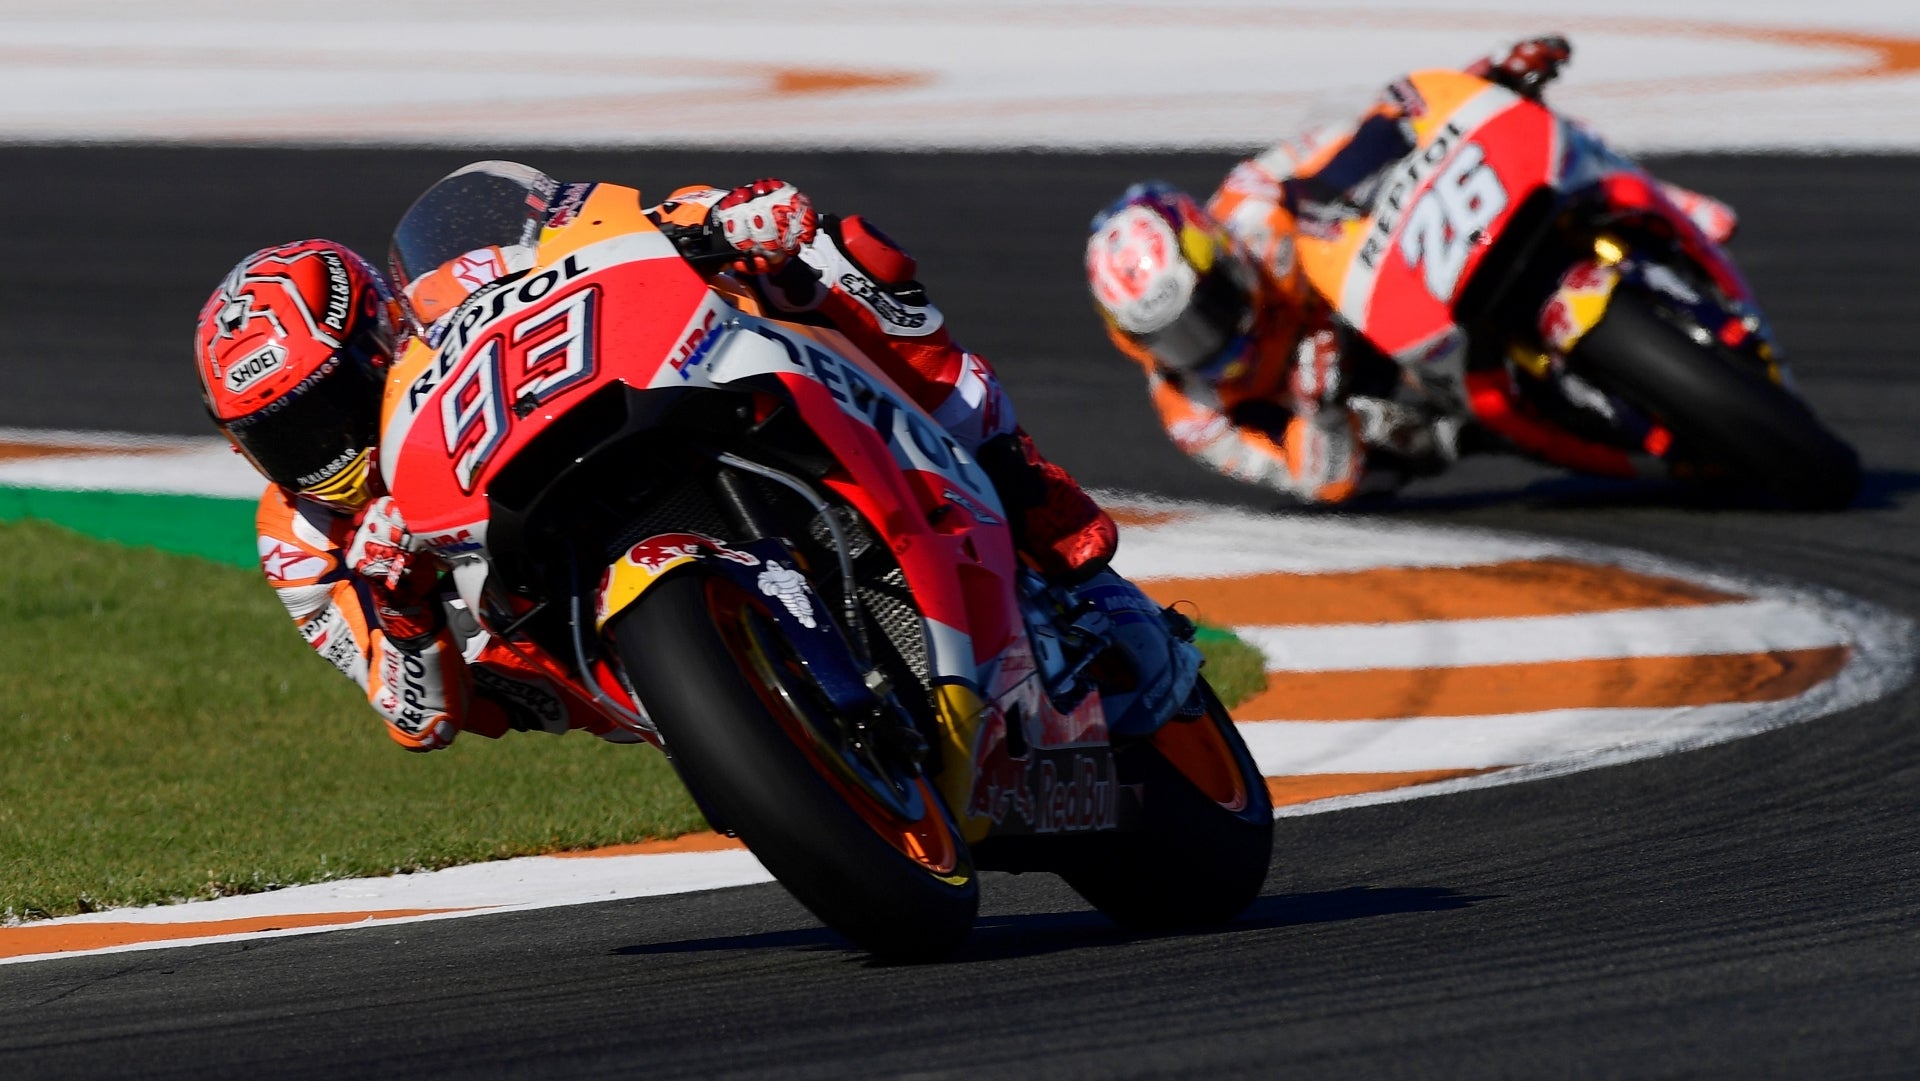 MotoGP Champion Marc Márquez May Get F1 Test With Red Bull